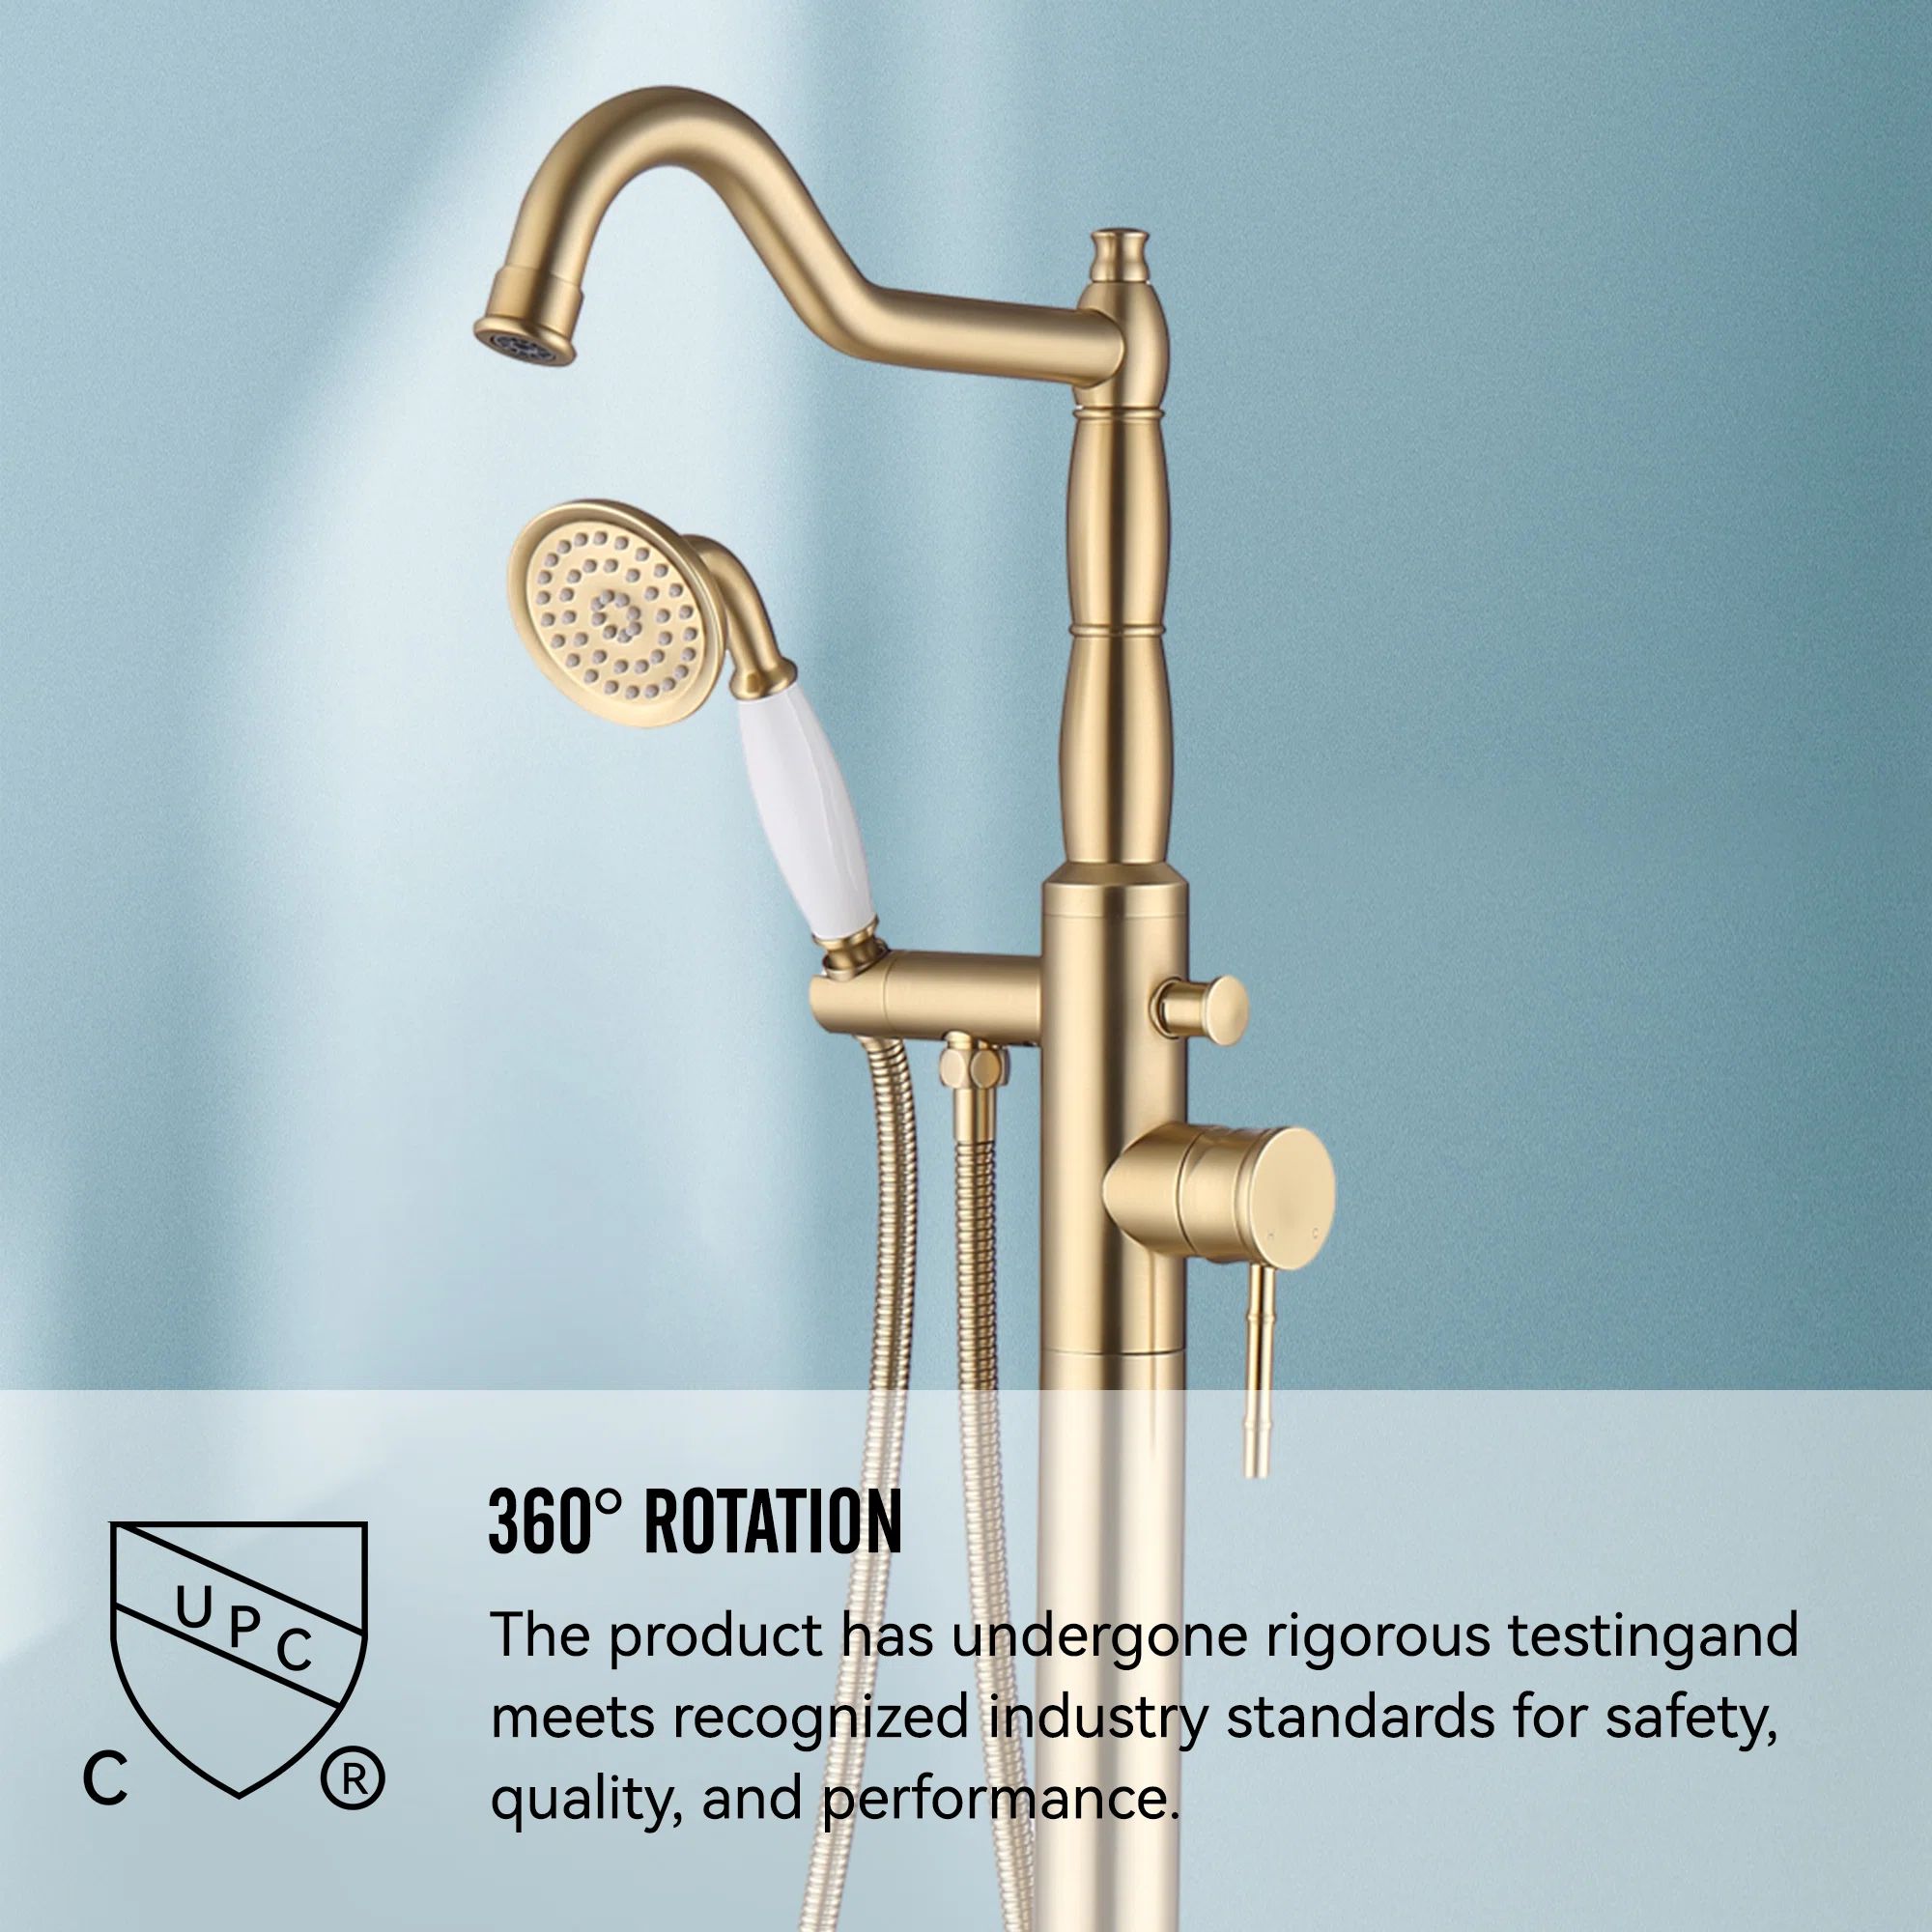 Cisy Floor Mounted Tub Filler with Diverter and Handshower | Wayfair North America